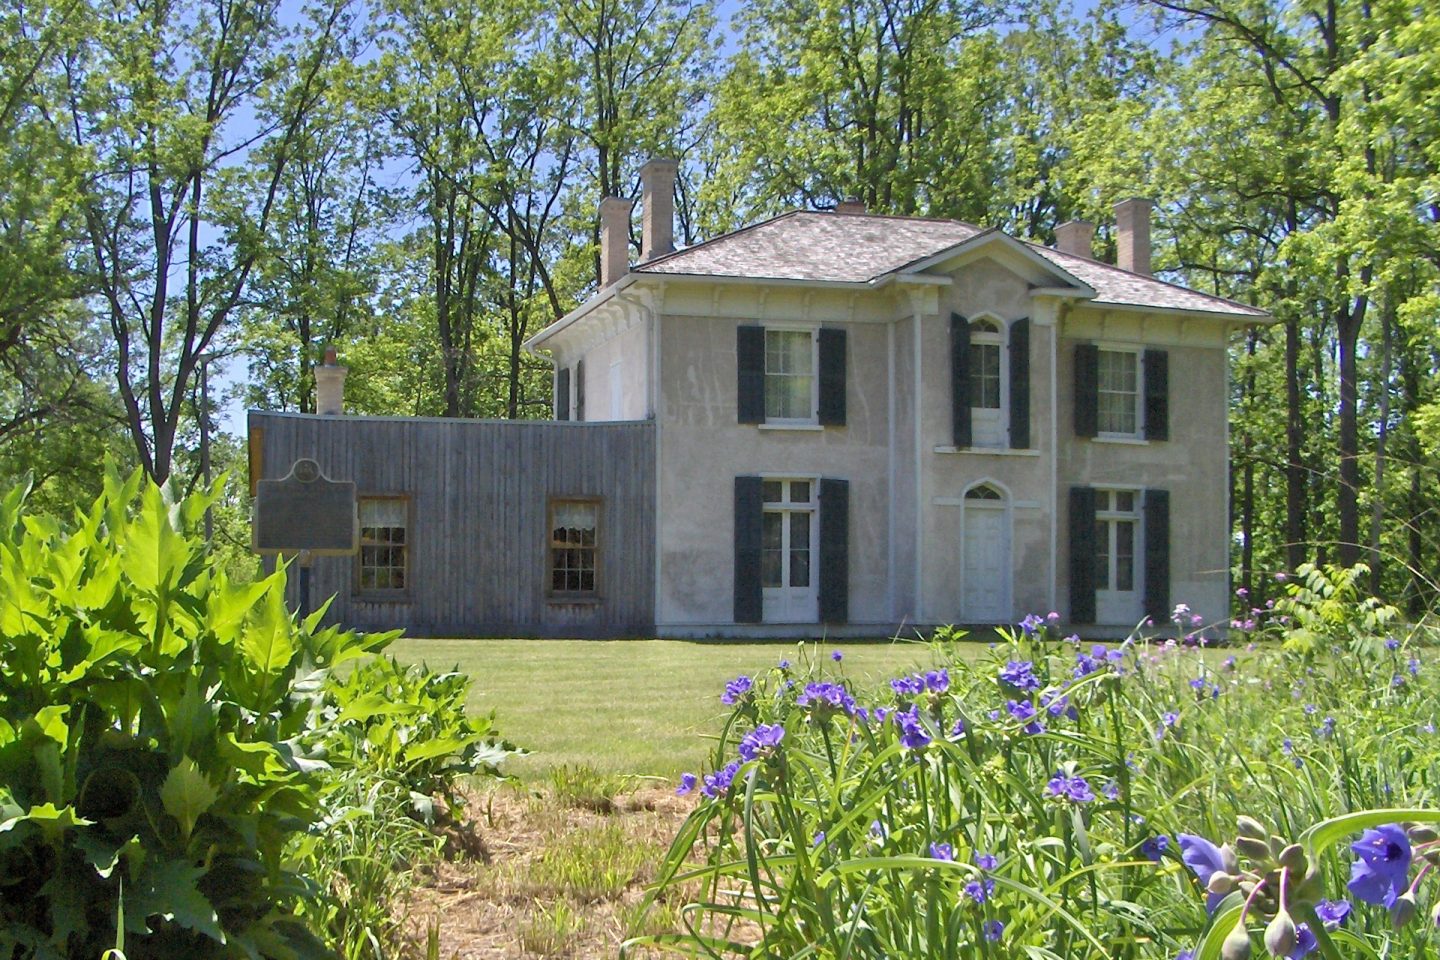 Chiefswood National Historic Site